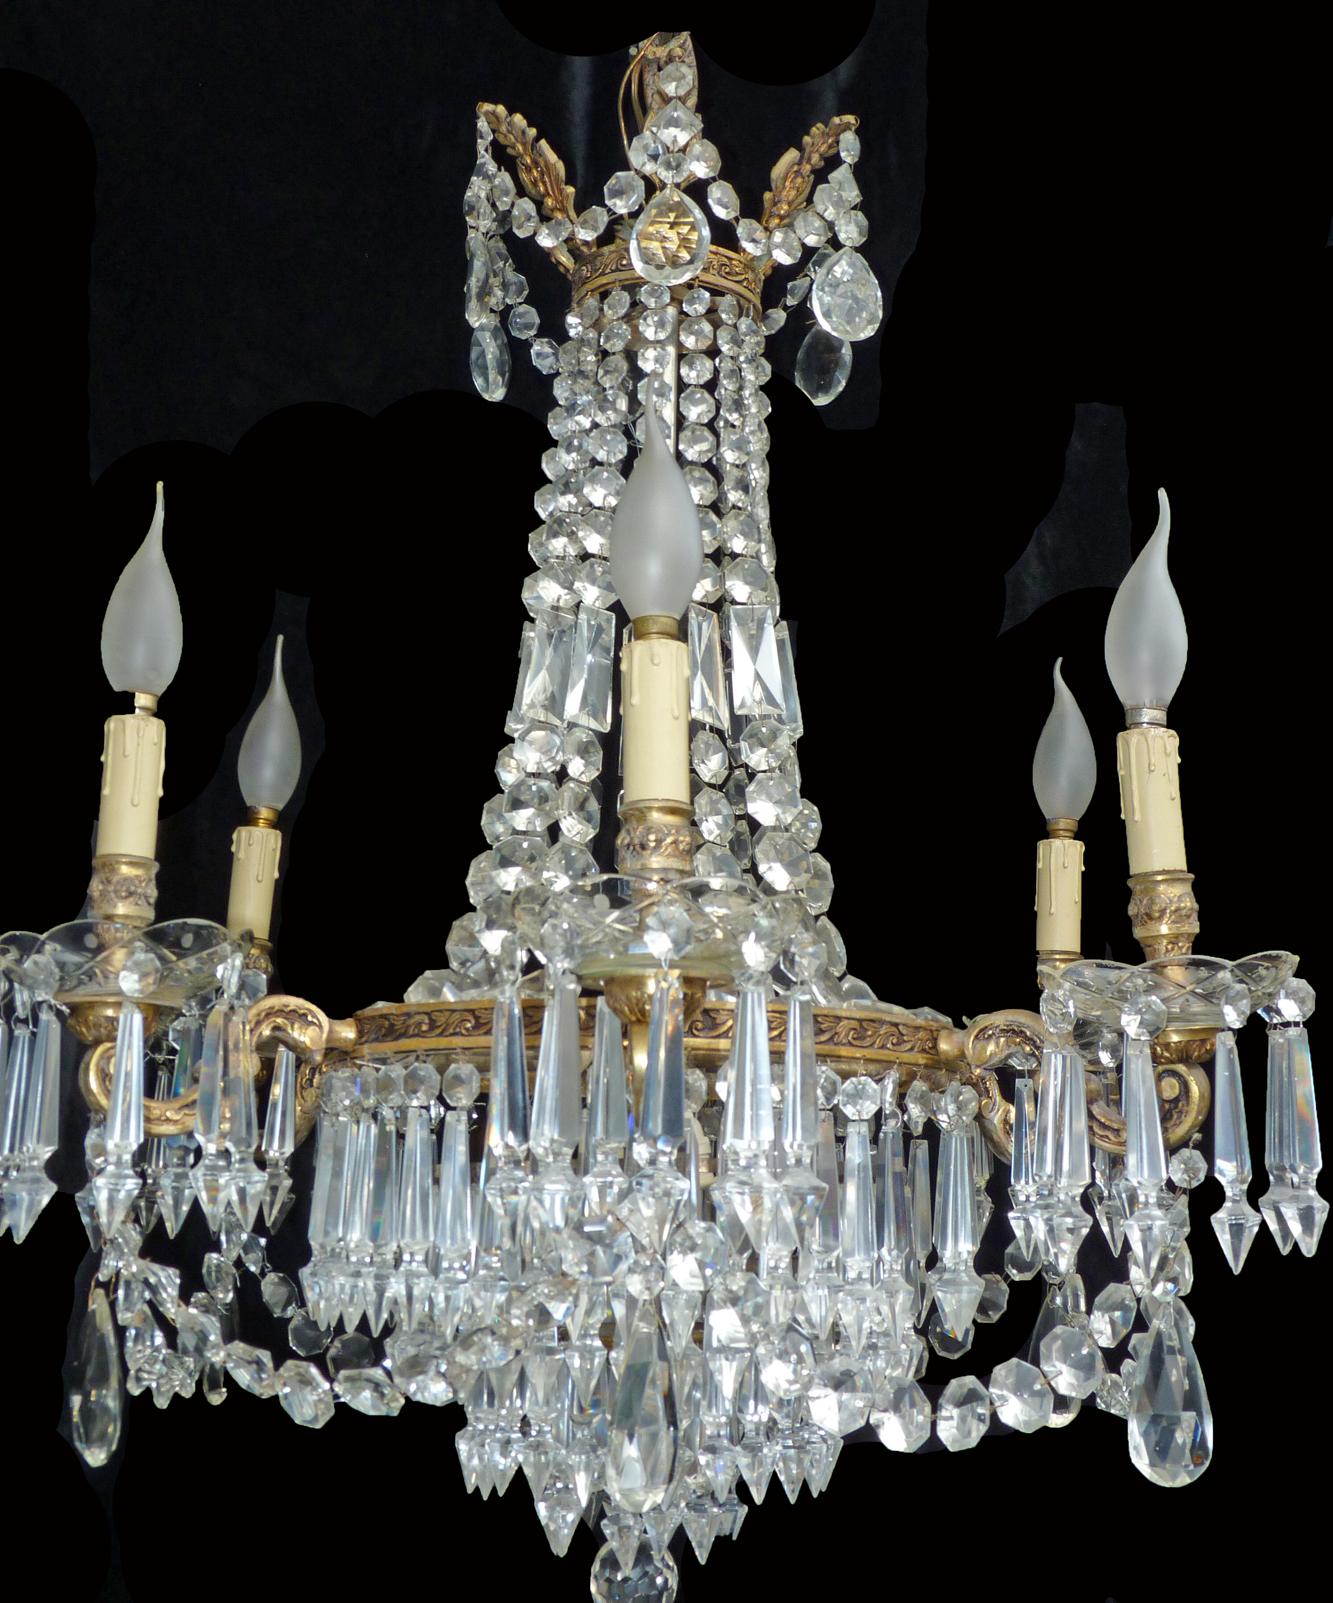 Louis XVI Regency Empire Crystal and Bronze Twelve-Light Wedding Cake Chandelier In Excellent Condition For Sale In Coimbra, PT